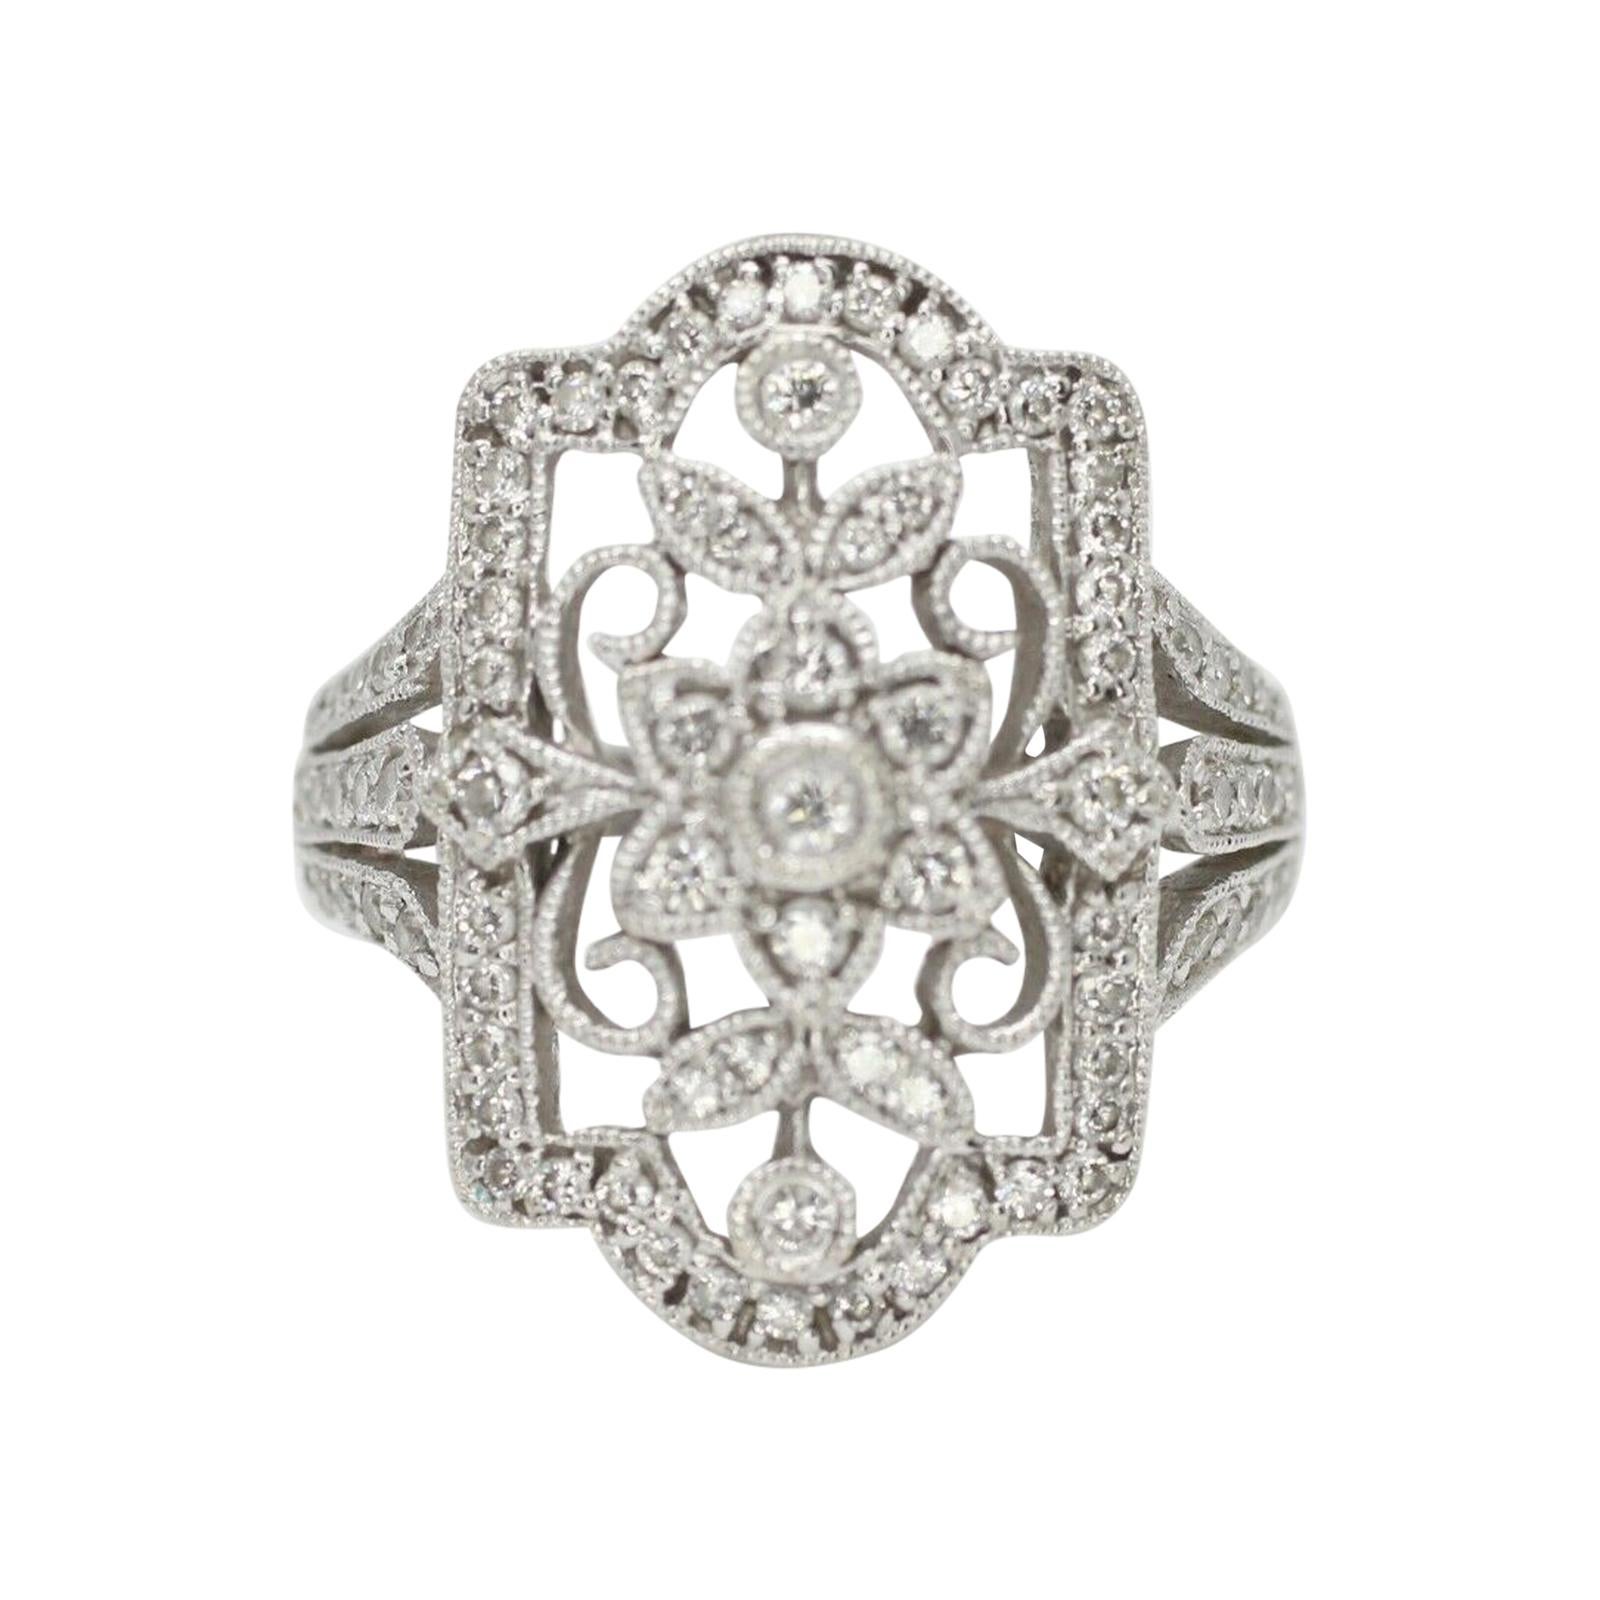 Victorian Style Filigree Ring with Diamond